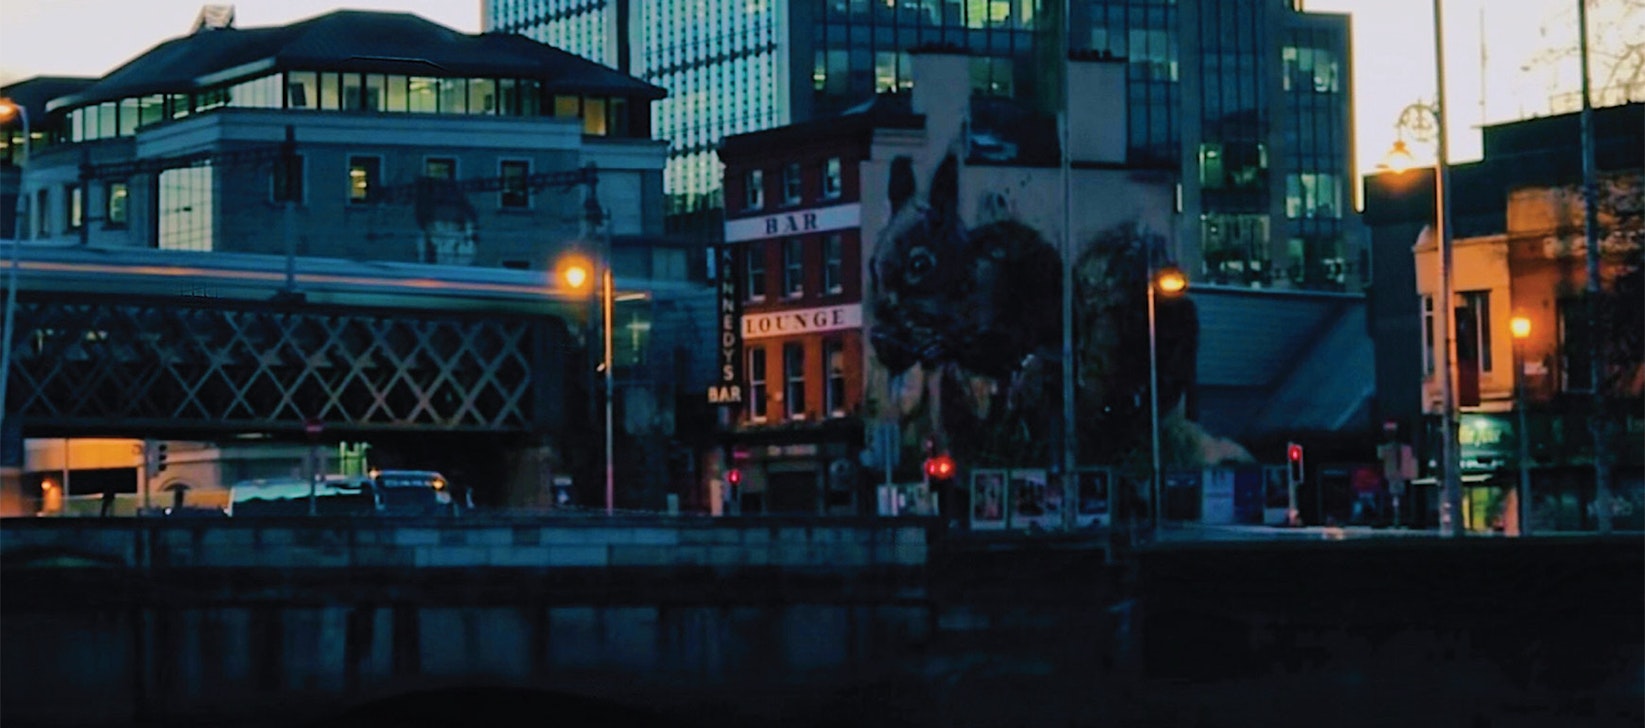 The Dublin City Development Plan and Competitiveness